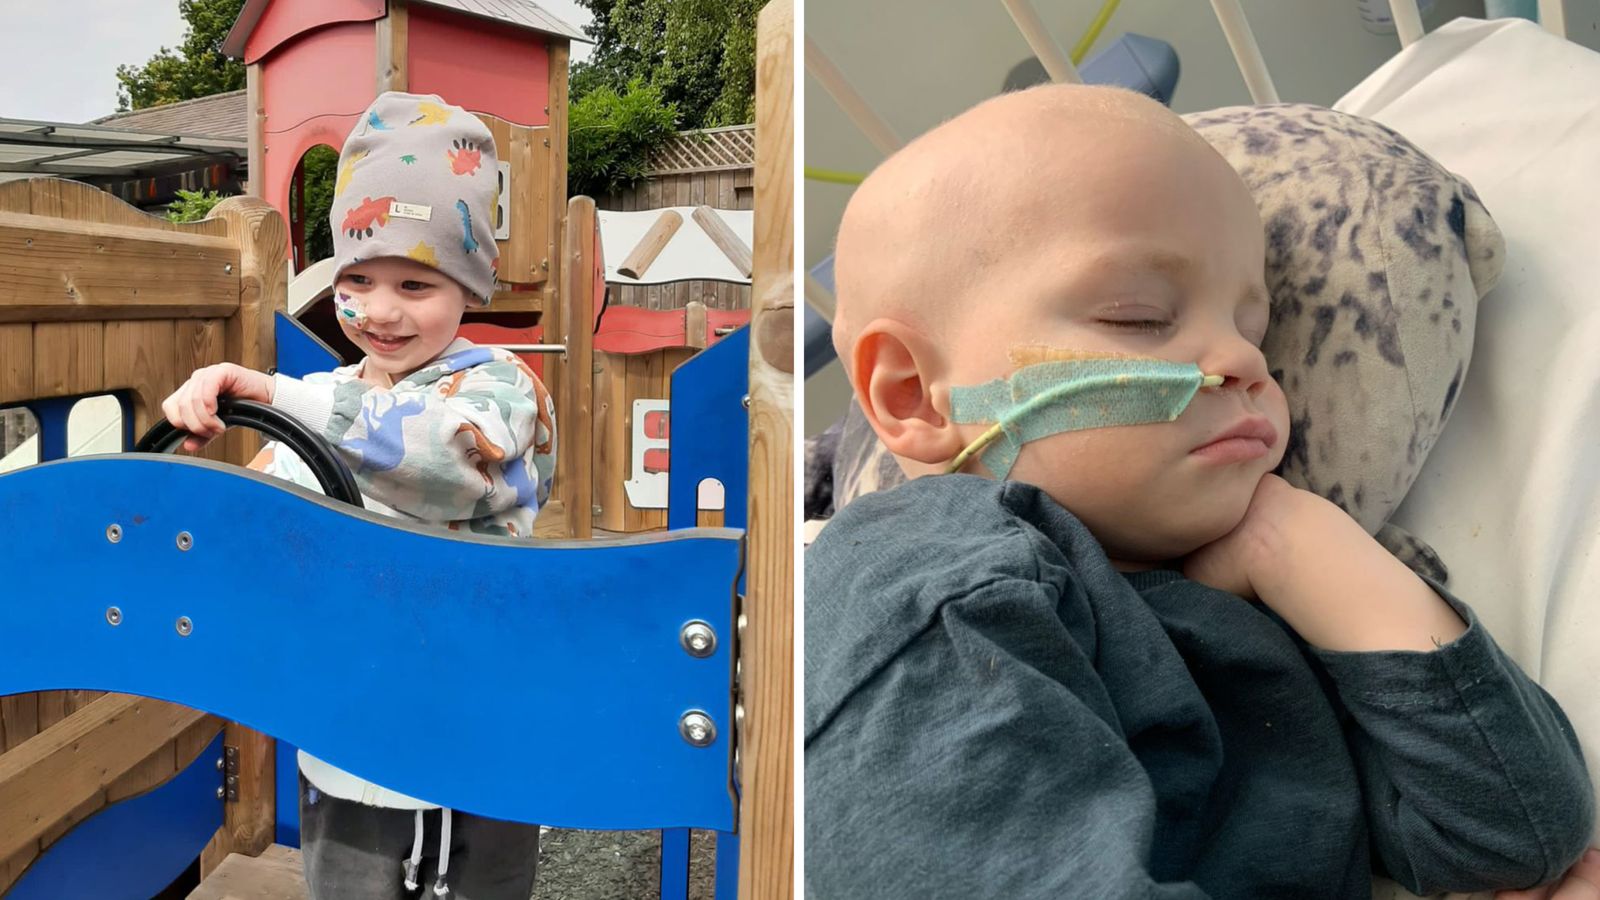 'The bottom fell out of our world' - coping with childhood cancer in a cost of living crisis